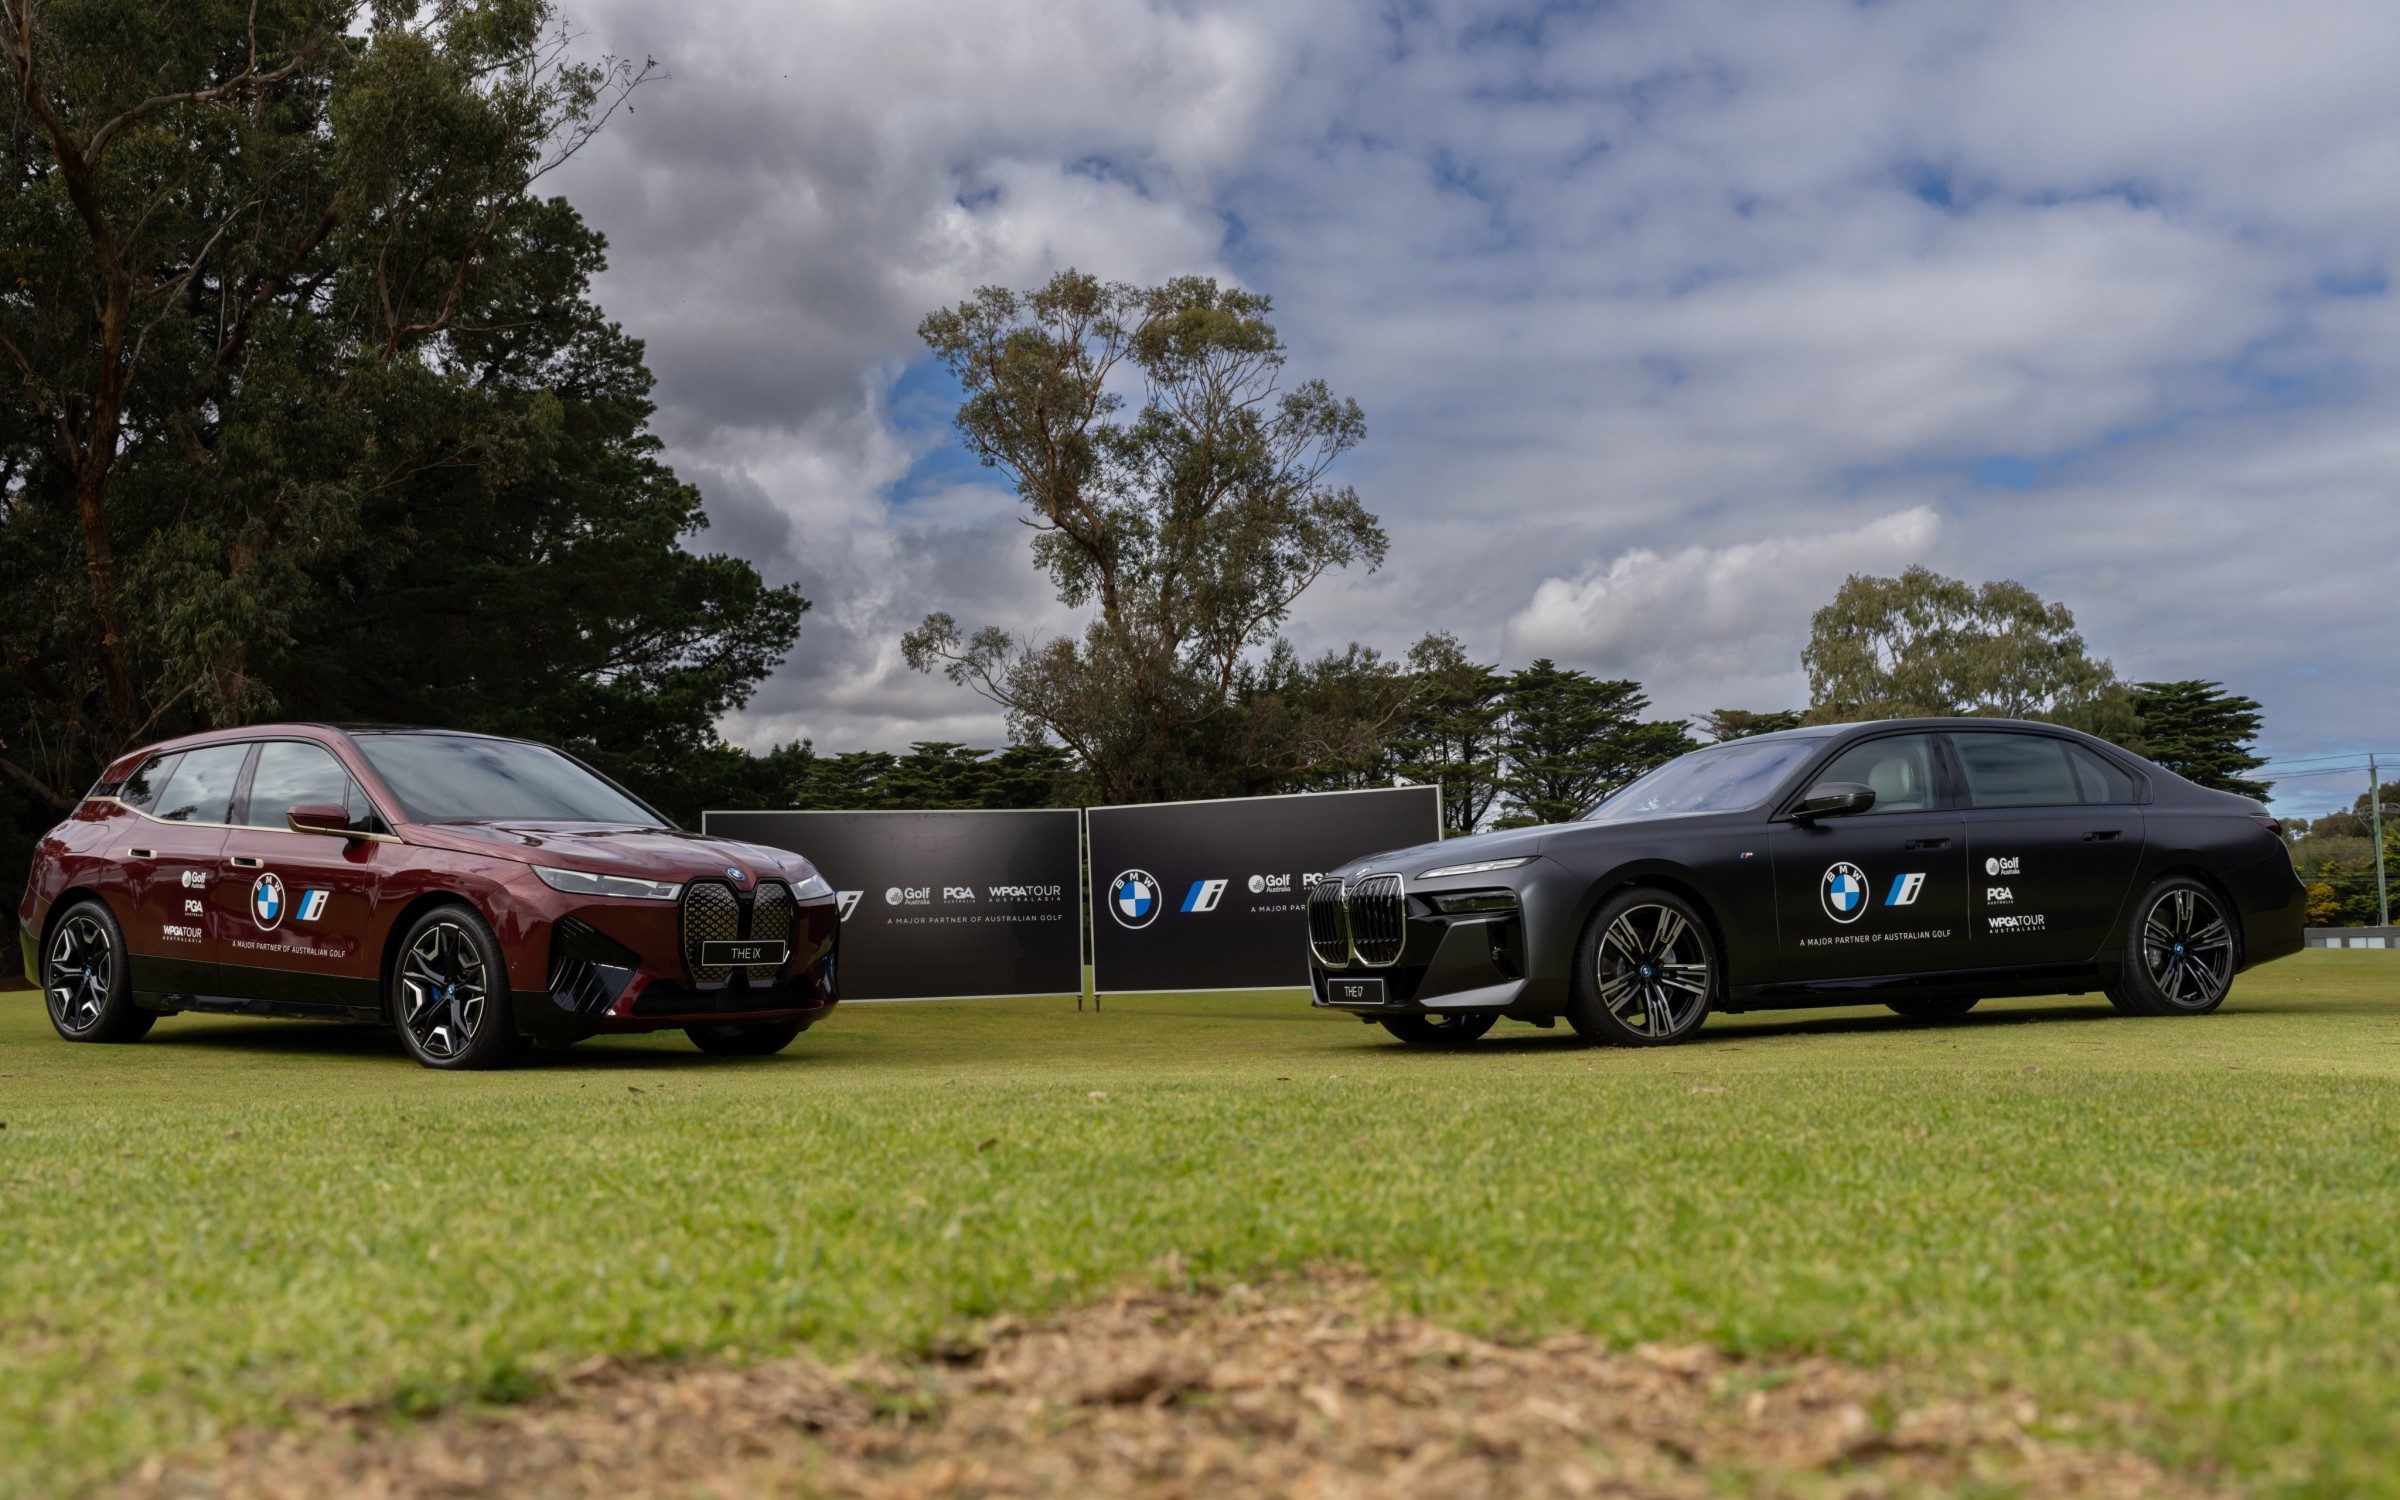 Australian Golf signs BMW Australia as first joint major partner is history-making moment